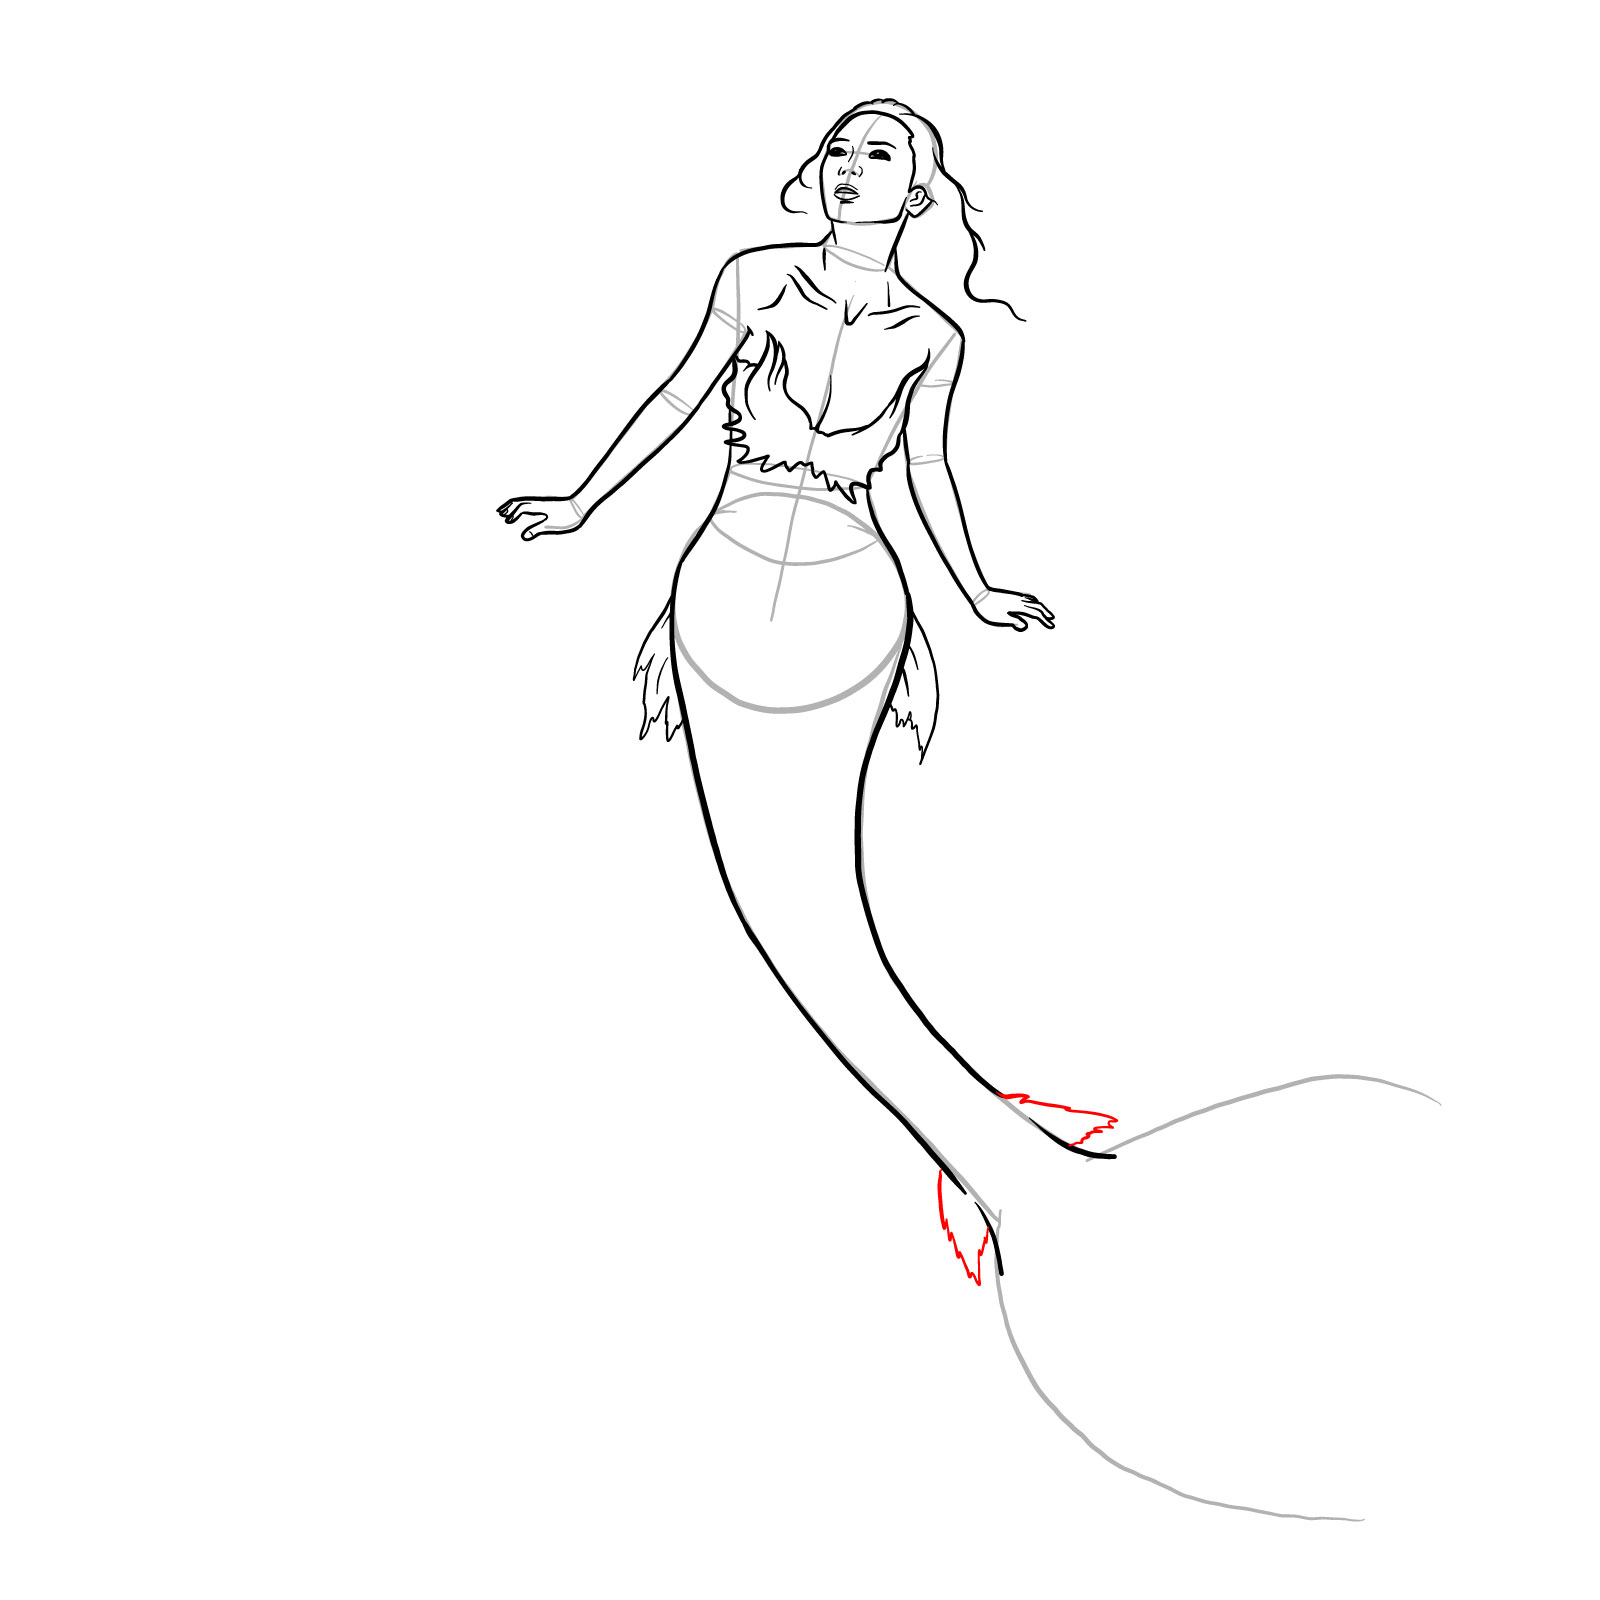 How to draw a Mermaid - step 21